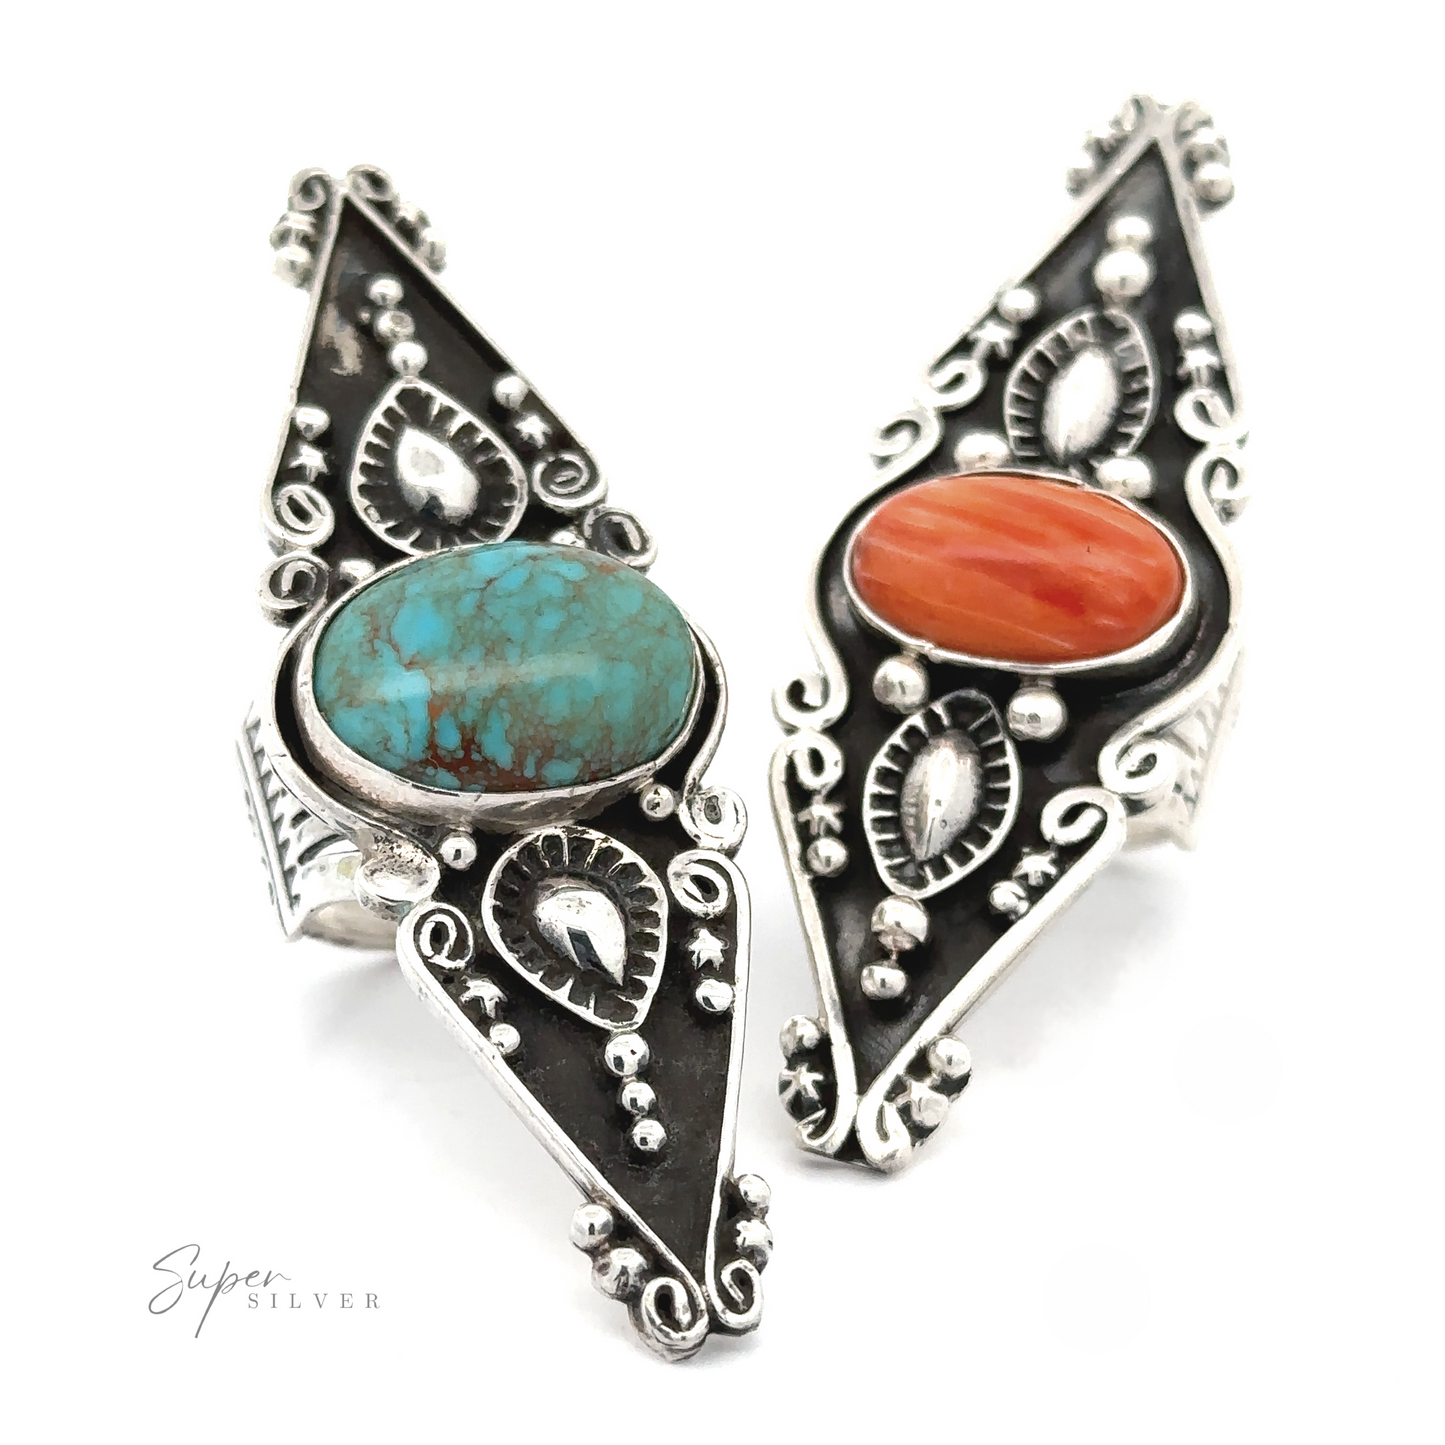 Pair of Stunning Native American Statement Rings with ornate Southwest artistry, each featuring a large turquoise and a smaller coral stone.